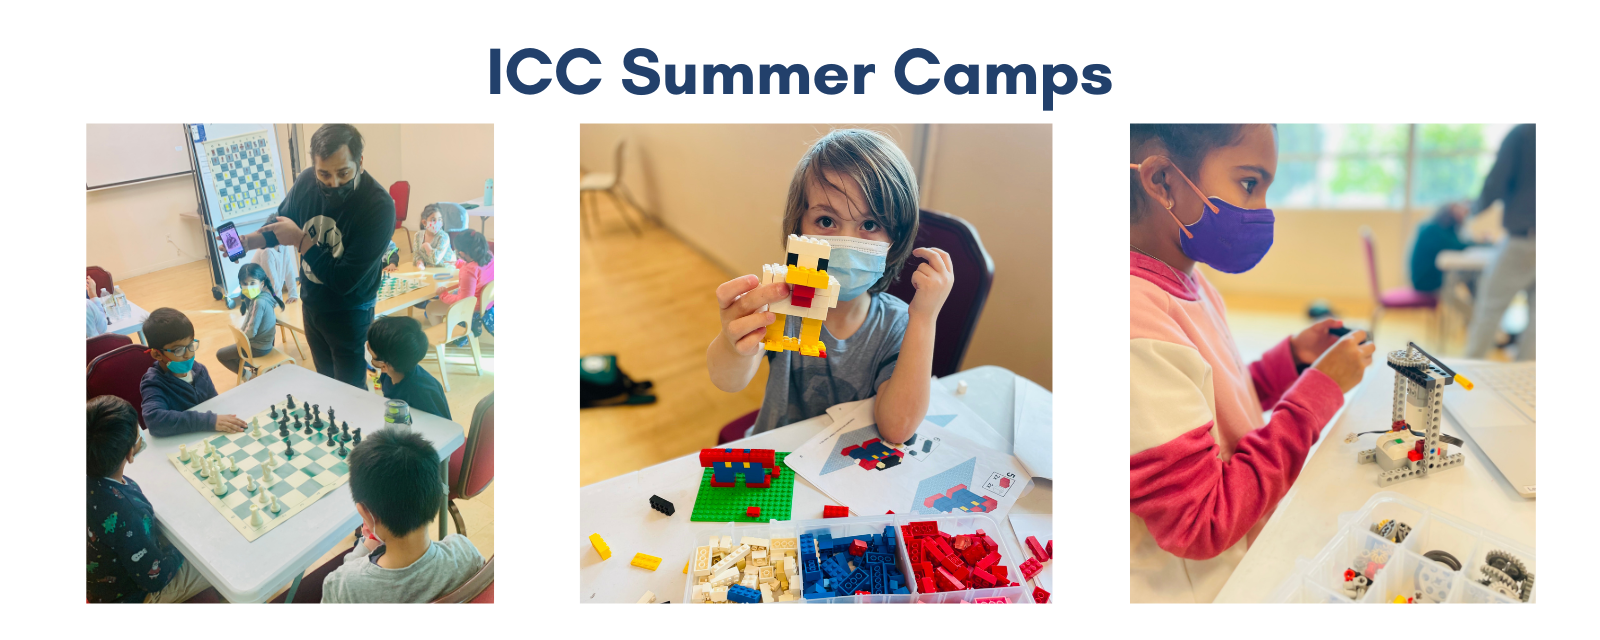 Summer Camps Indiacc